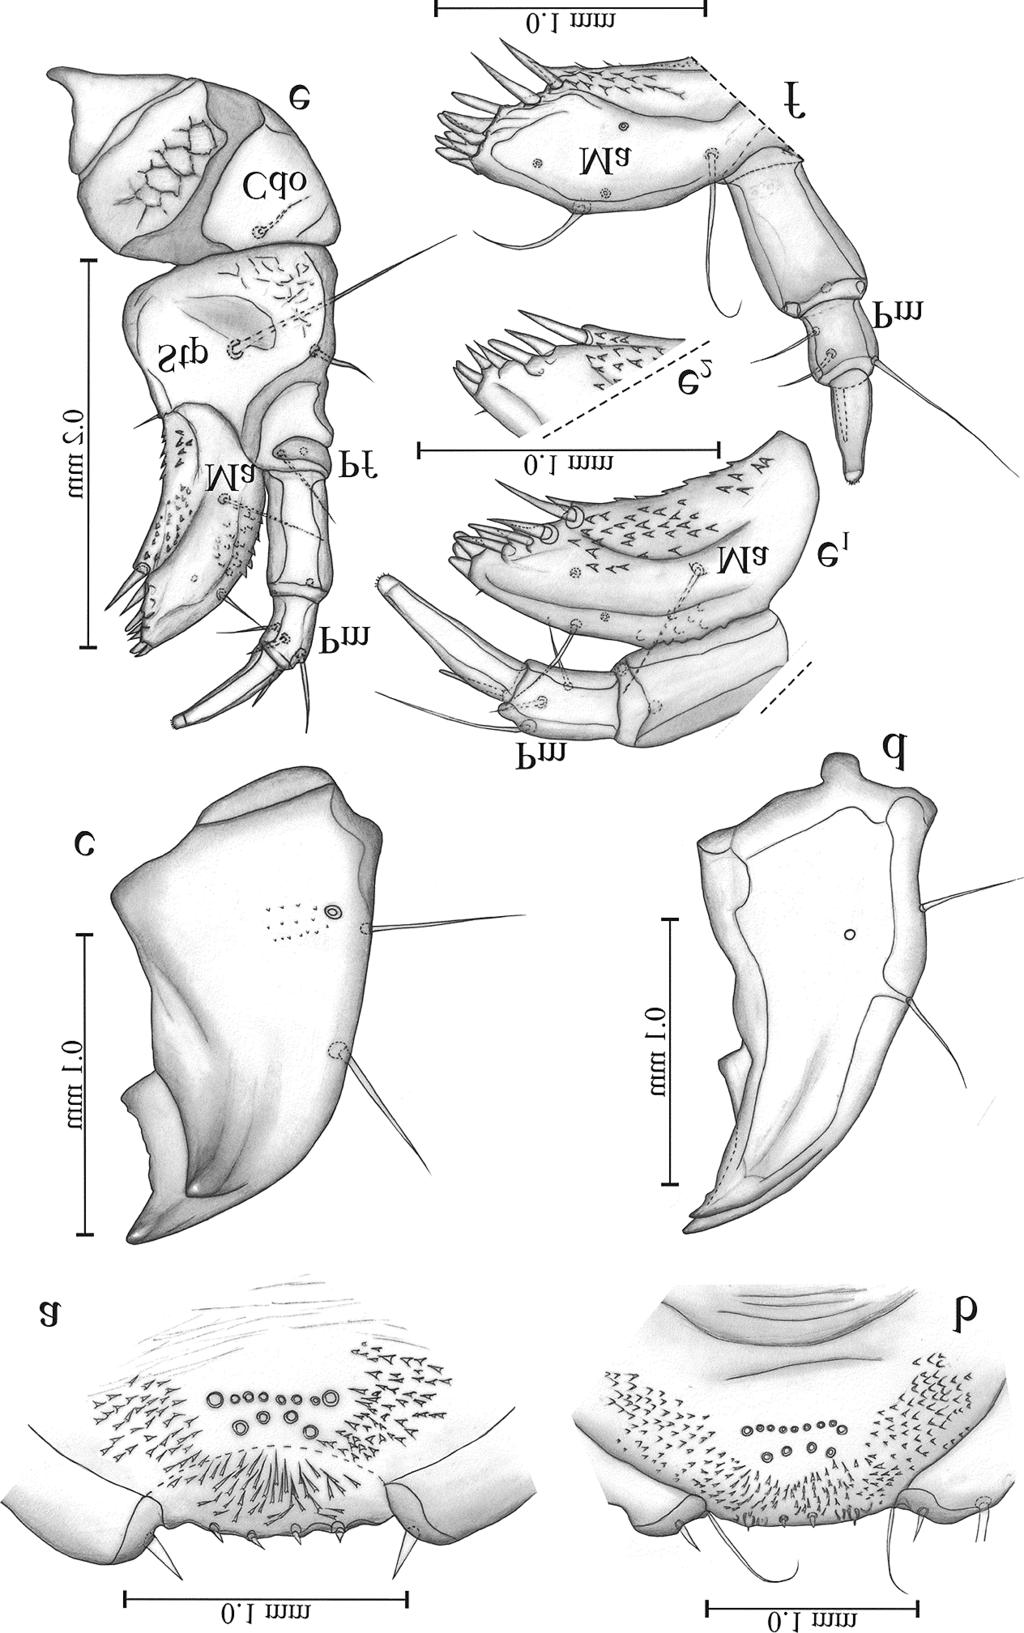 Fig 3. Mature larva of H. picipennis (a,c,e) and H. nidicola (b,d,f). a, b. Epipharynx. c, d. Right mandible in dorsal view. e.